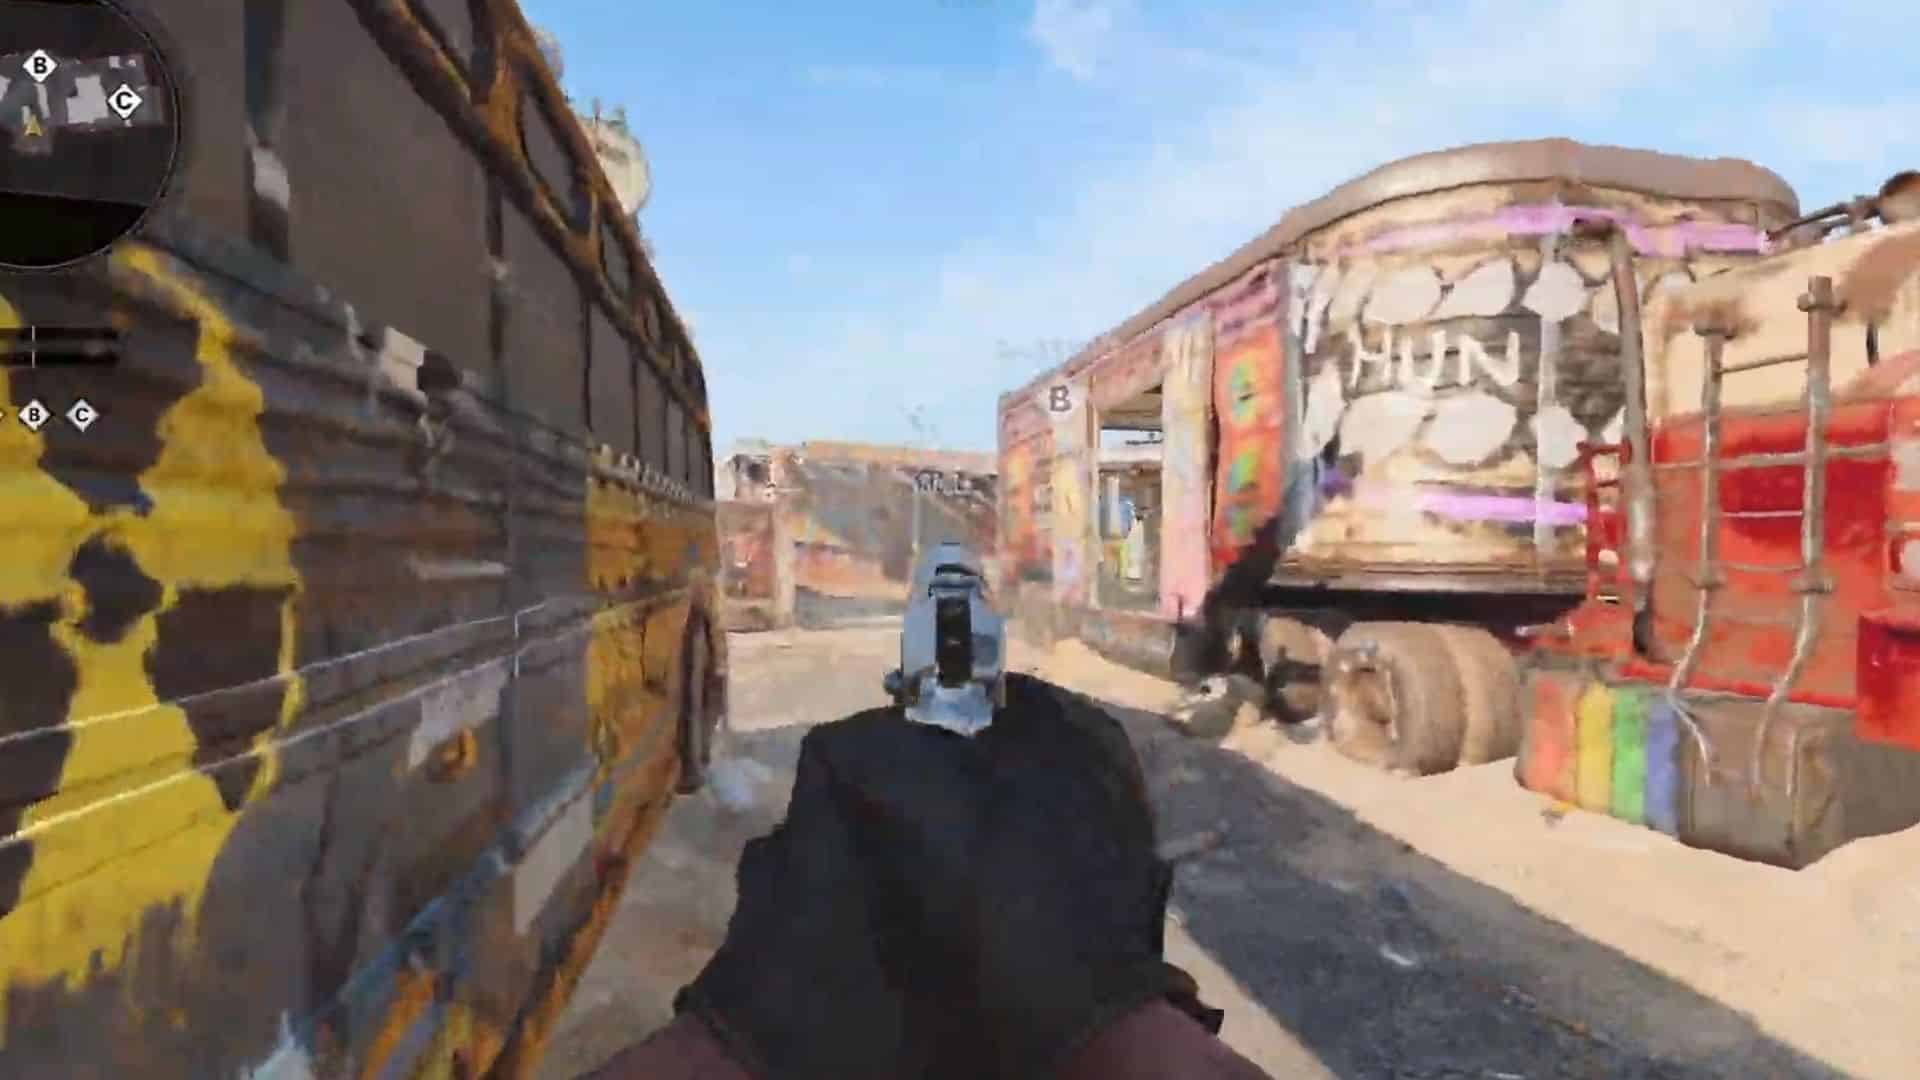 the middle of nuketown 84 in bocw